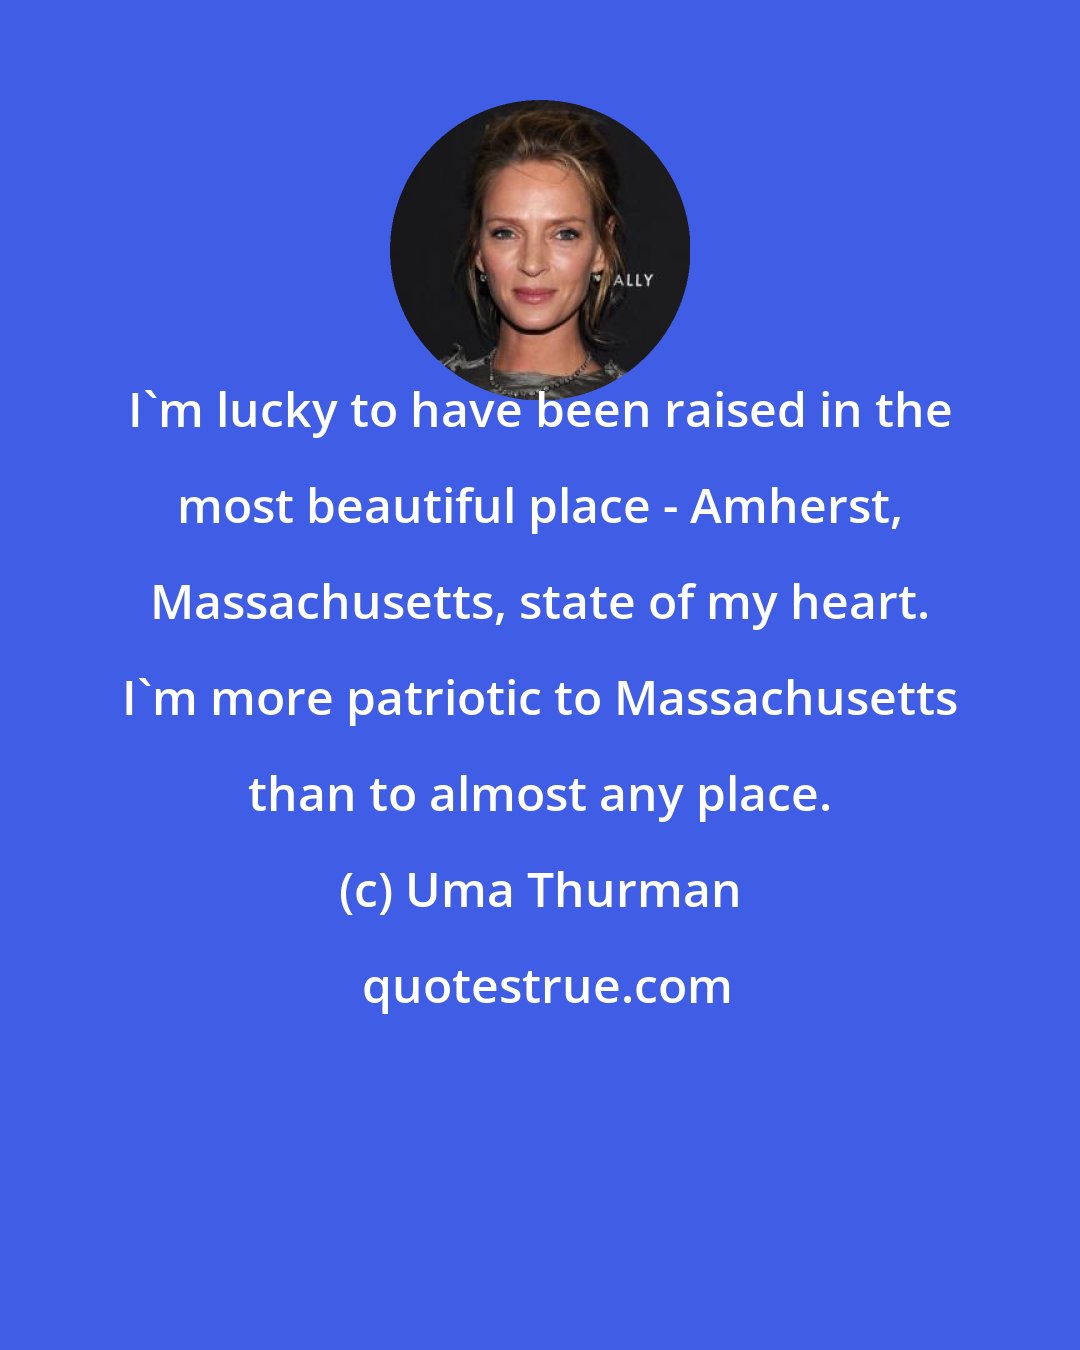 Uma Thurman: I'm lucky to have been raised in the most beautiful place - Amherst, Massachusetts, state of my heart. I'm more patriotic to Massachusetts than to almost any place.